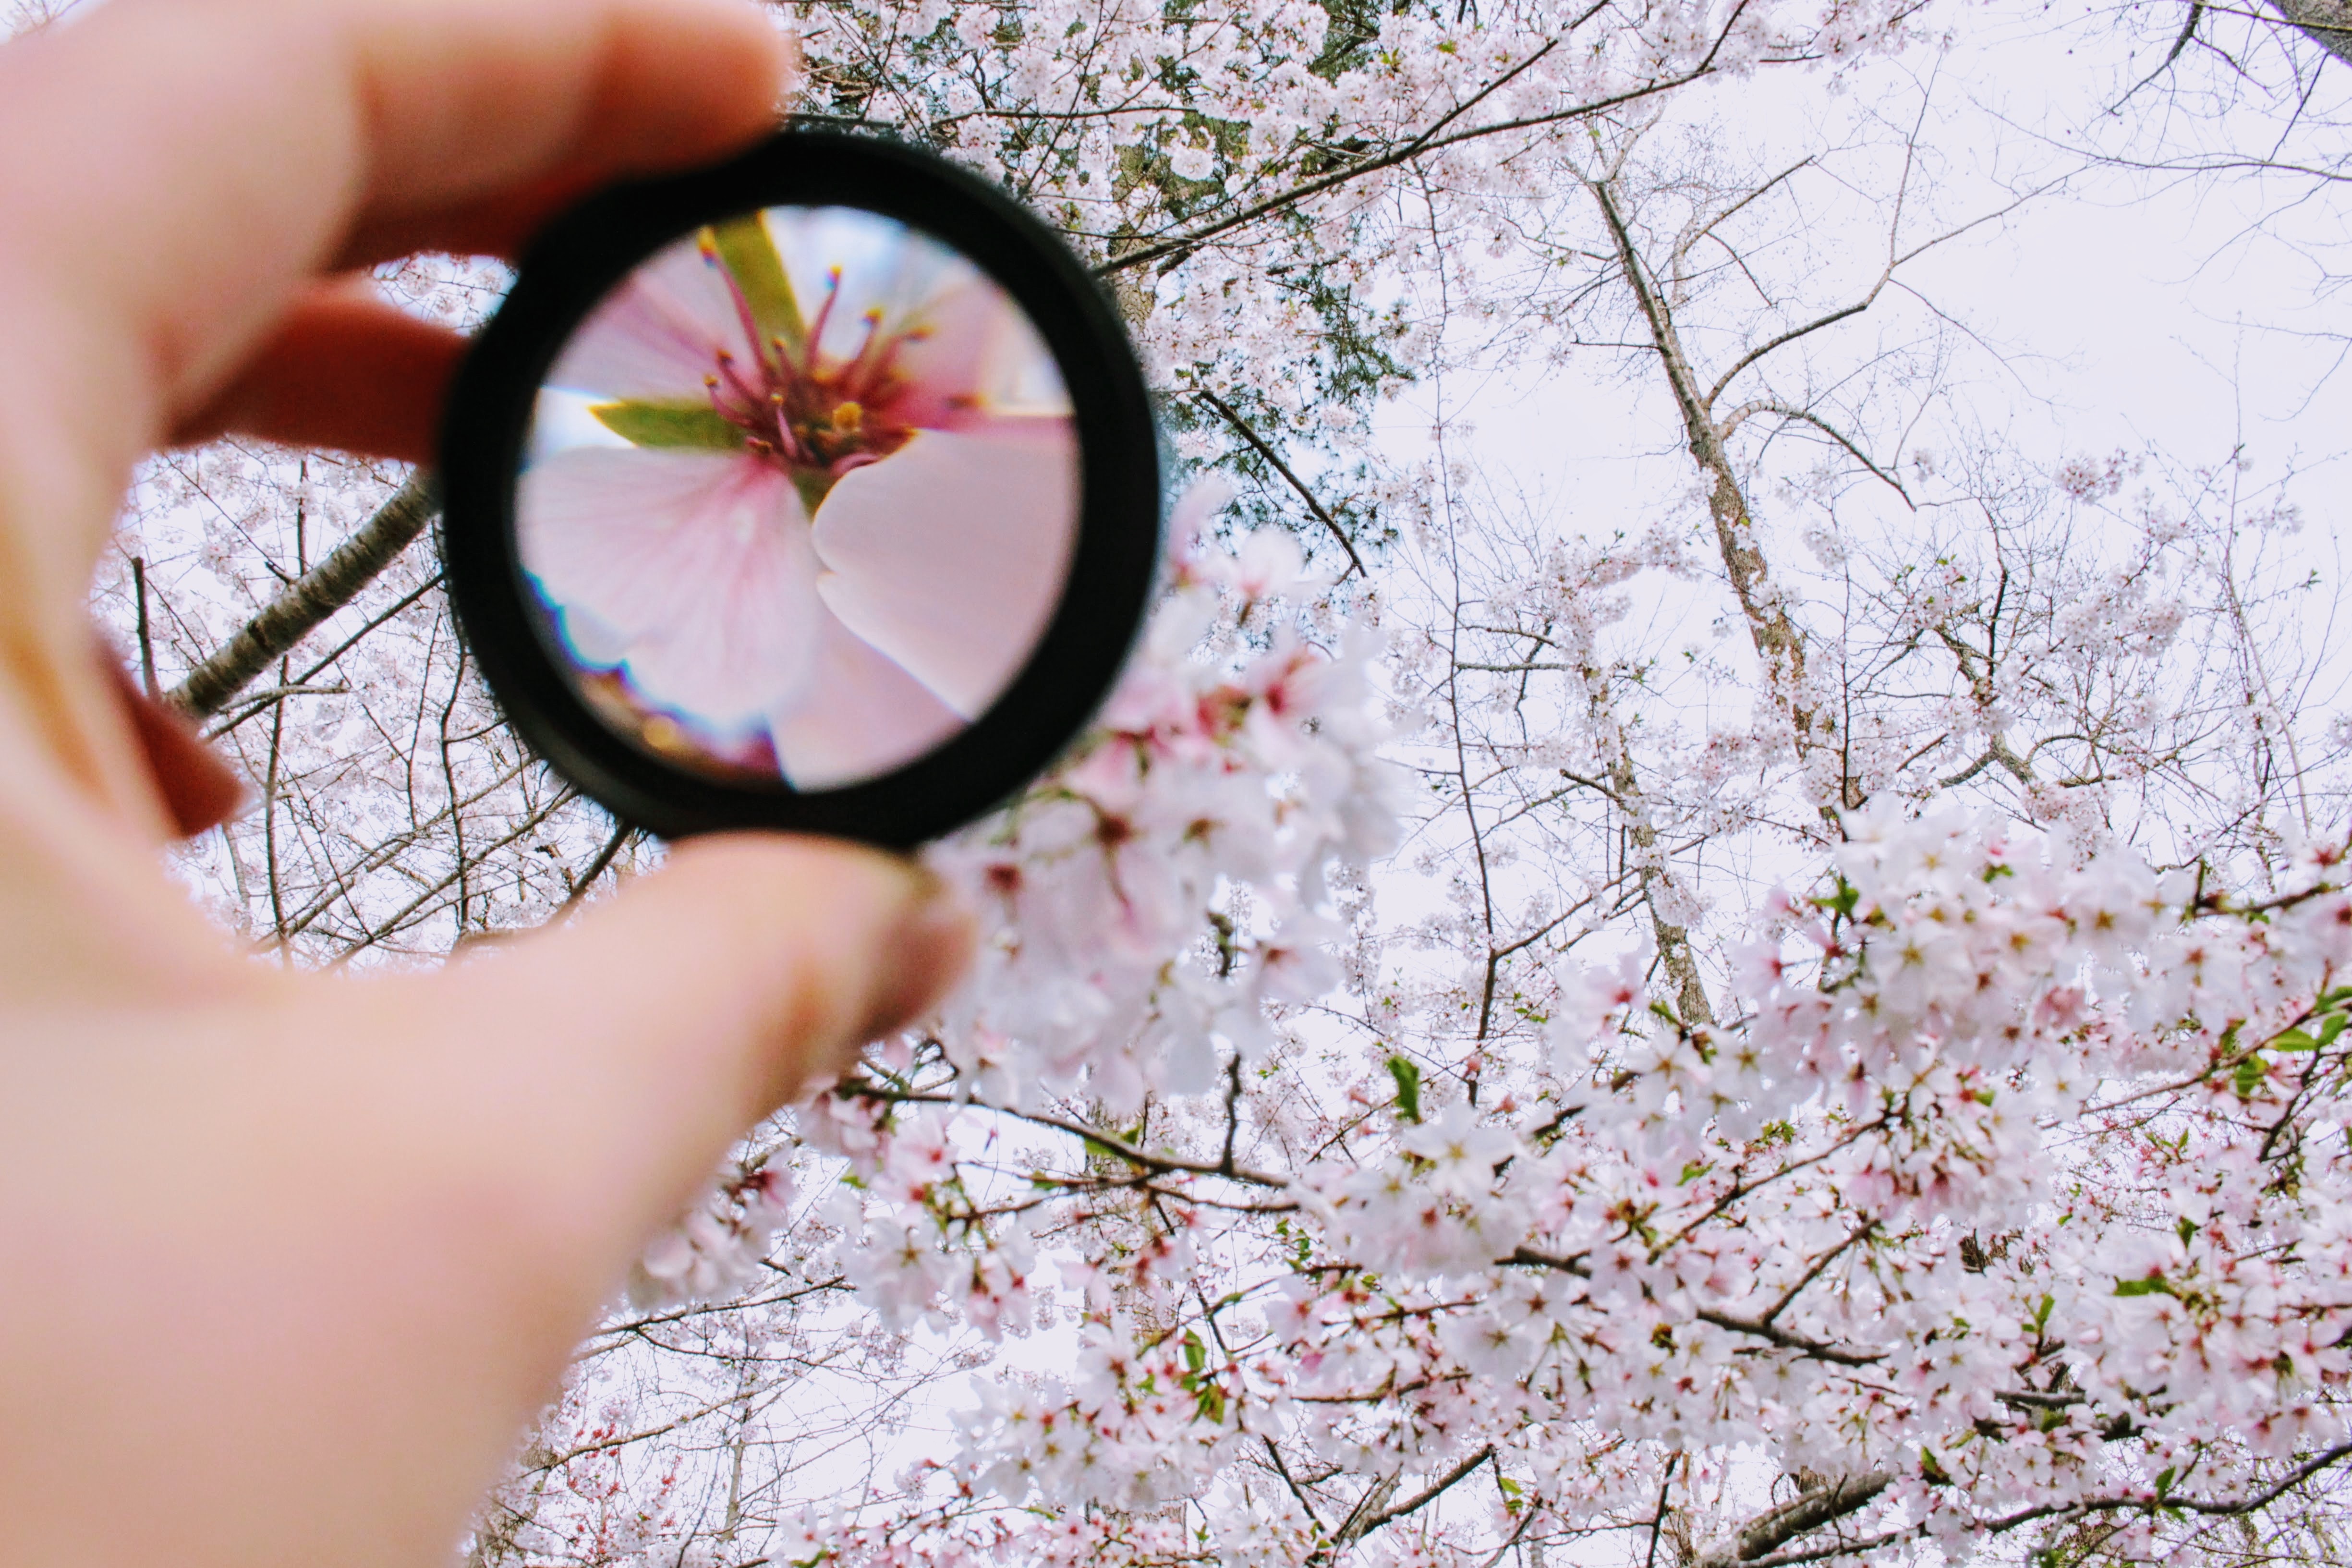 A cherry blossom tree with a magnifying glass focusing on one blossom